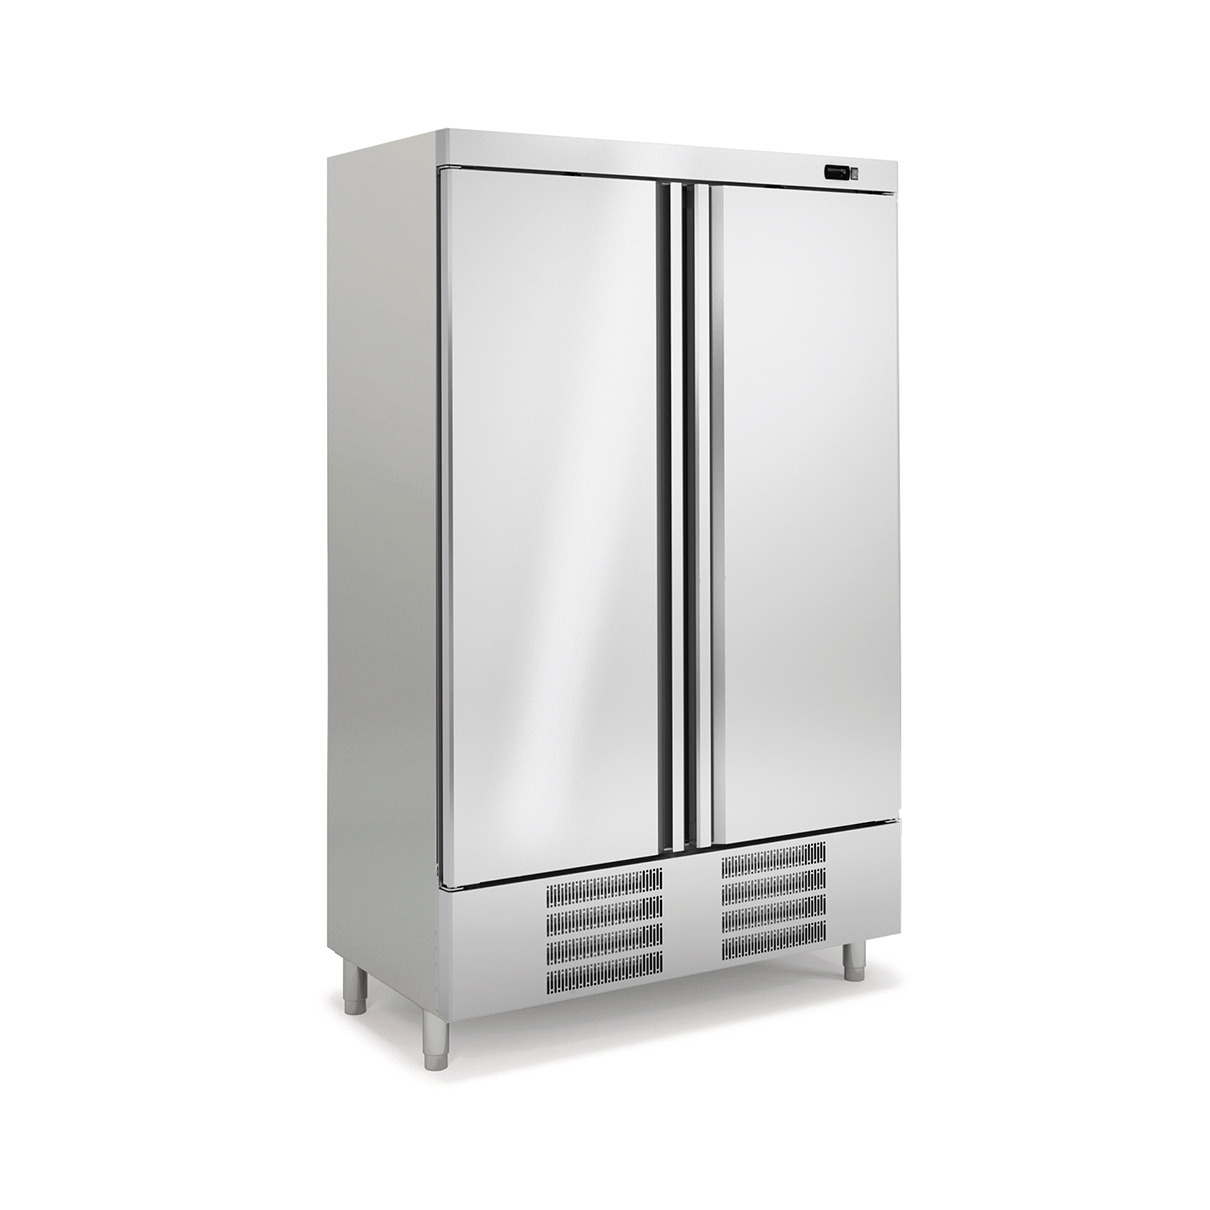 SNACK Refrigerated Cabinet ASD-125